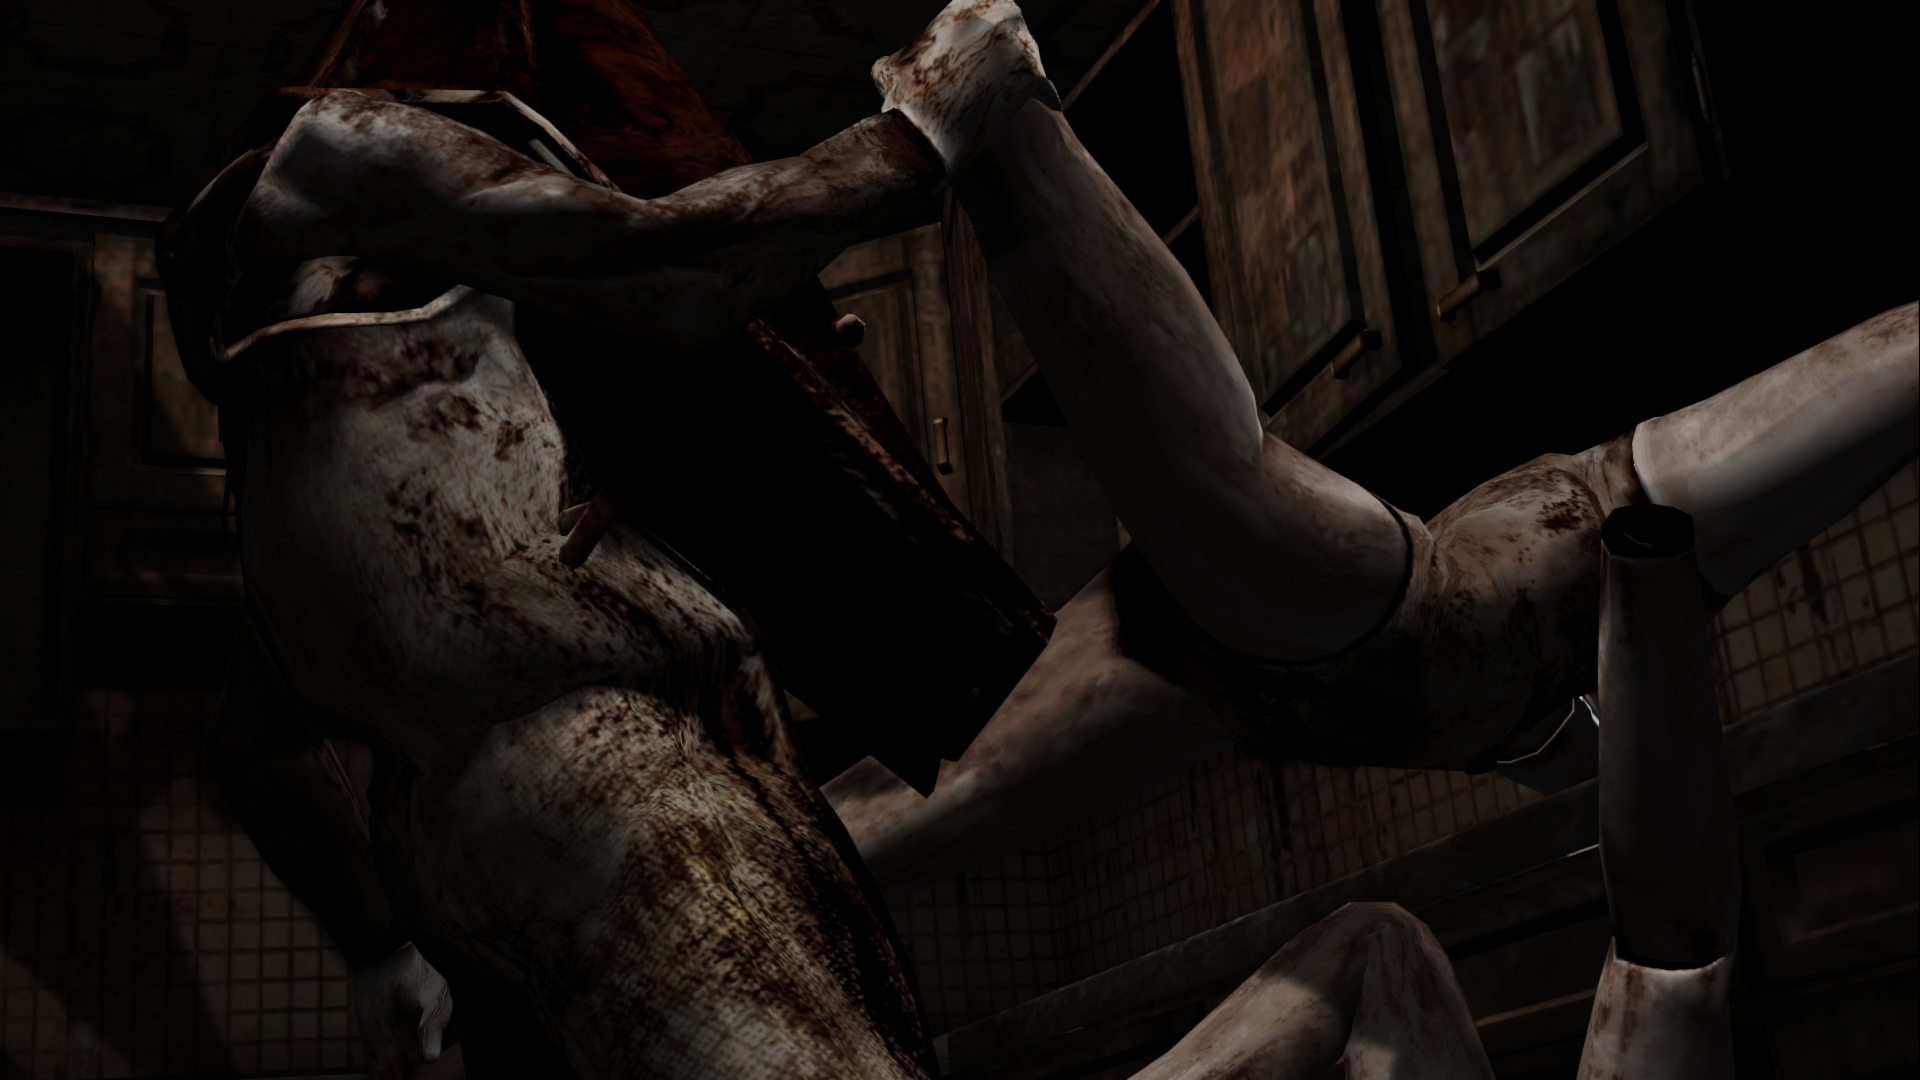 There are far more images available for Silent Hill 2, but these are the on...